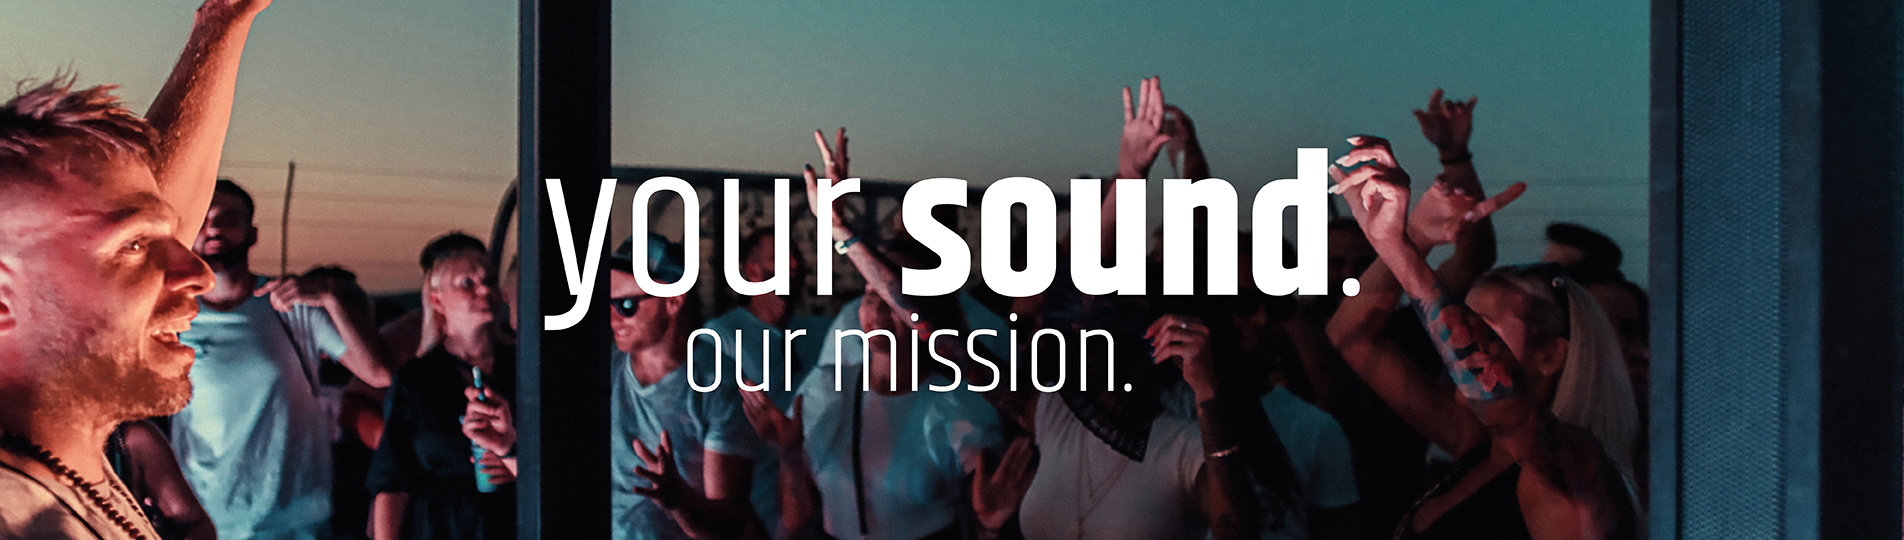 your sound. our mission.